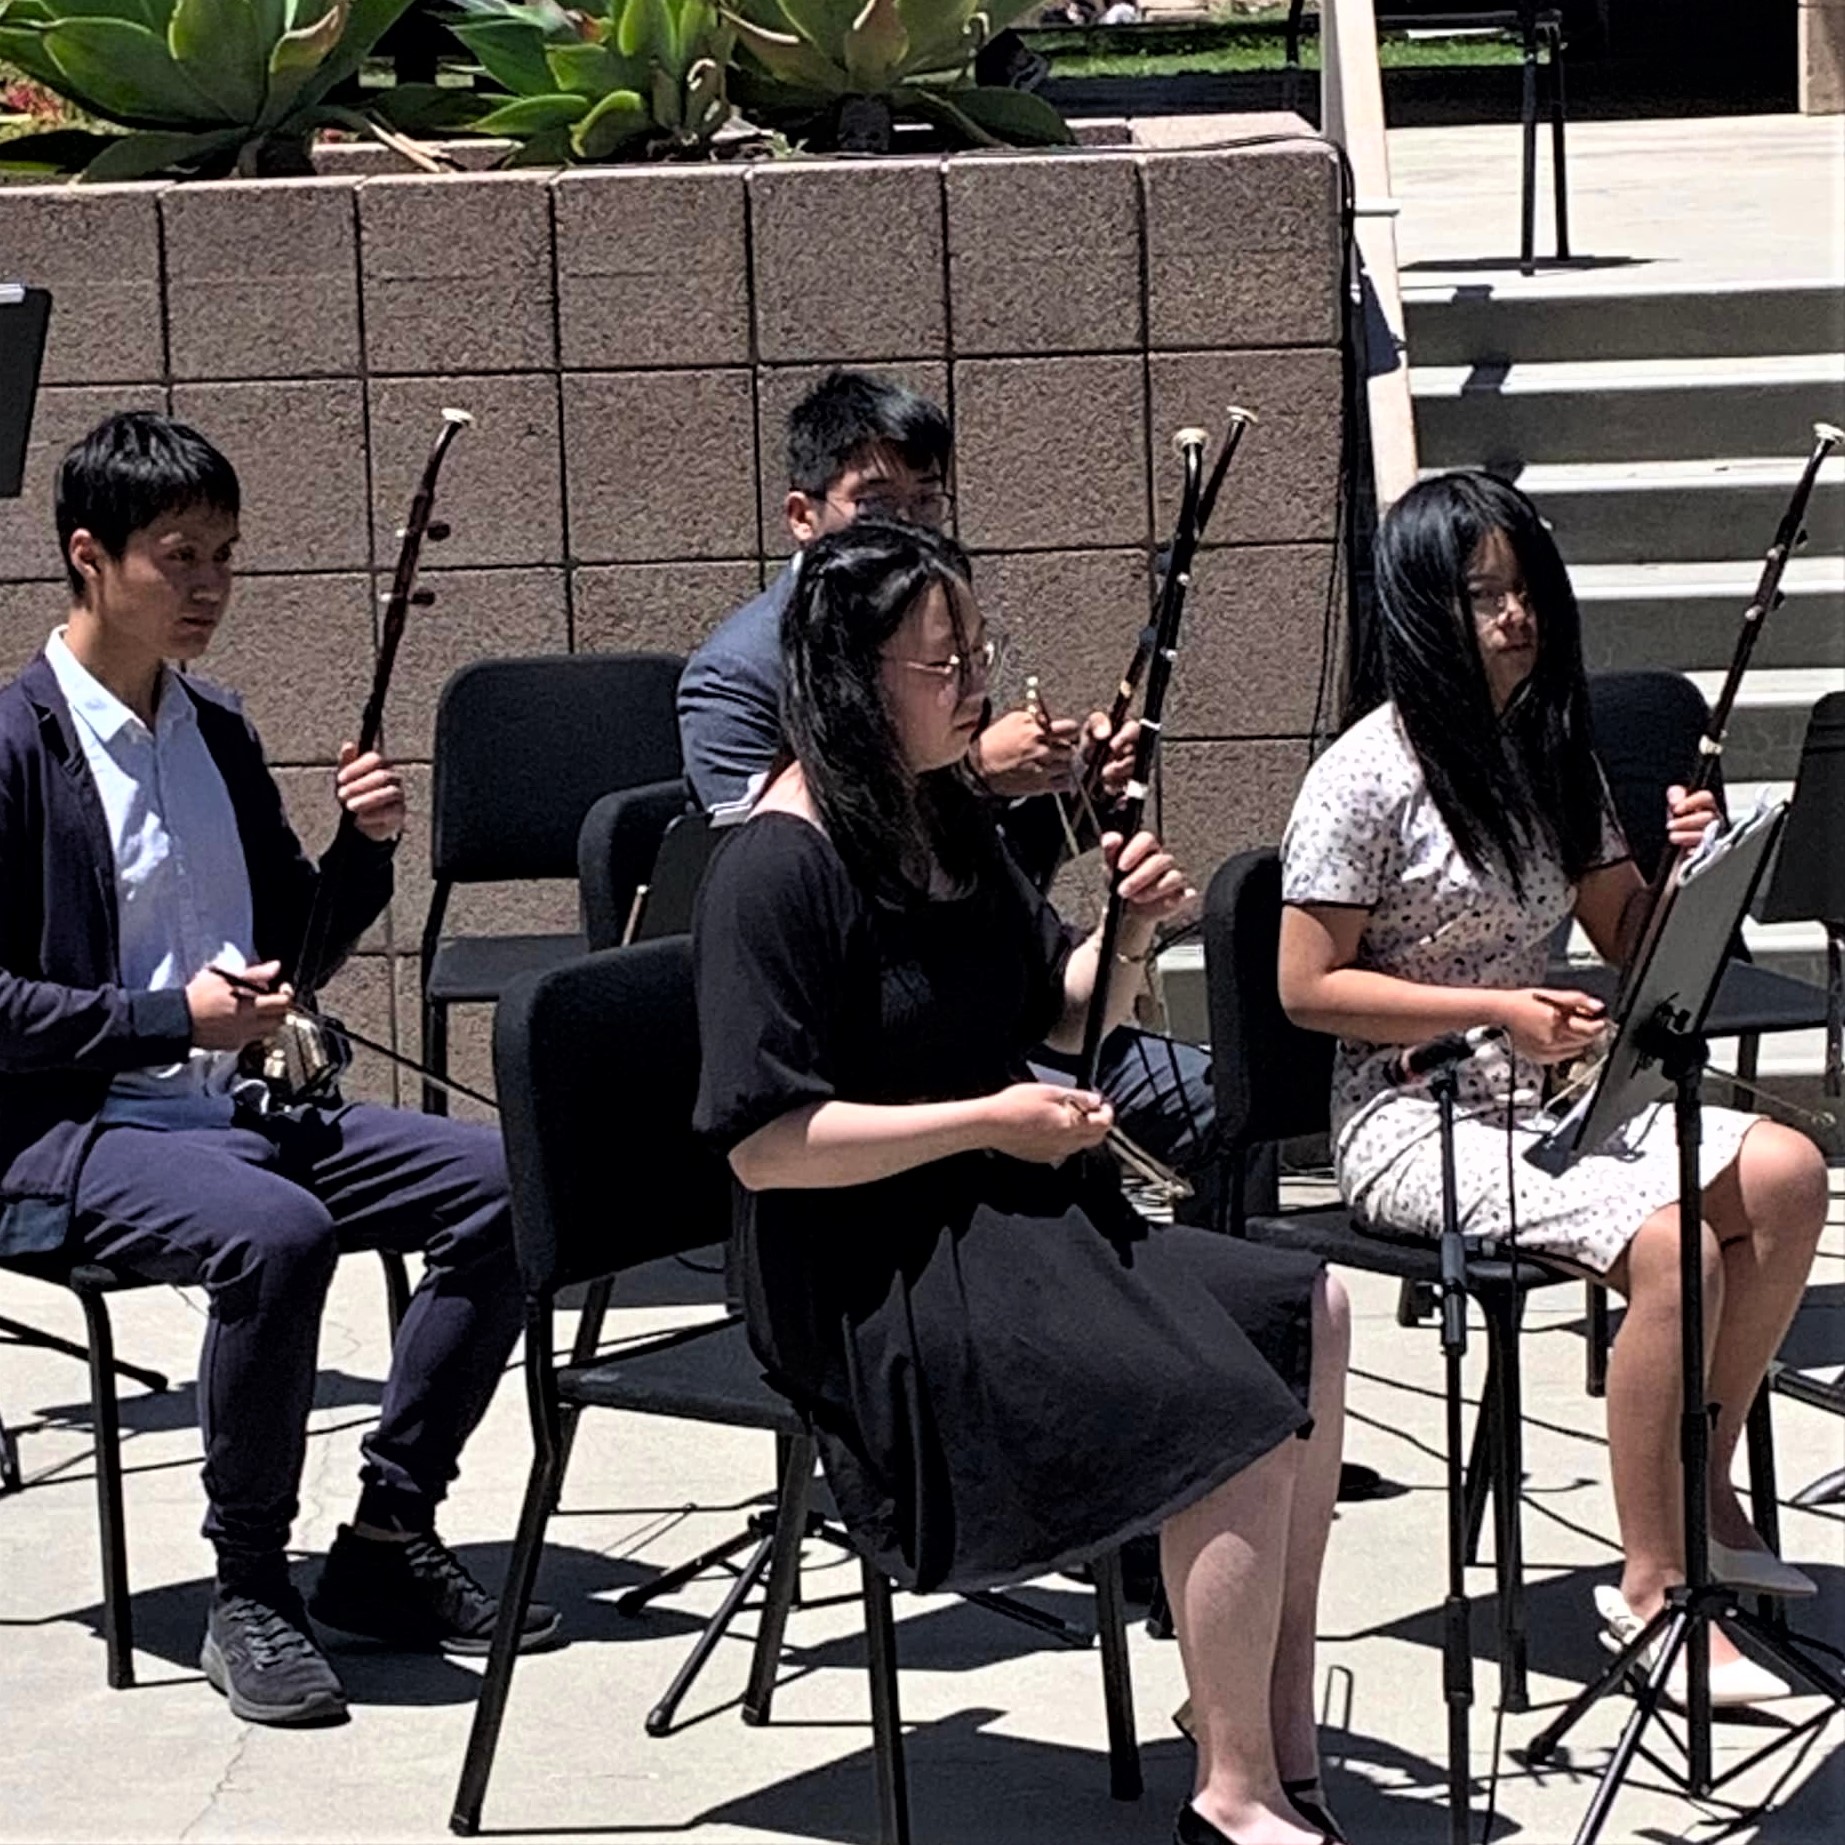 Wednesday 5/11 World Music Series noon concert at UCSB's Music Bowl: The Jasmine Echo Chinese Ensemble performed (Photo 2)